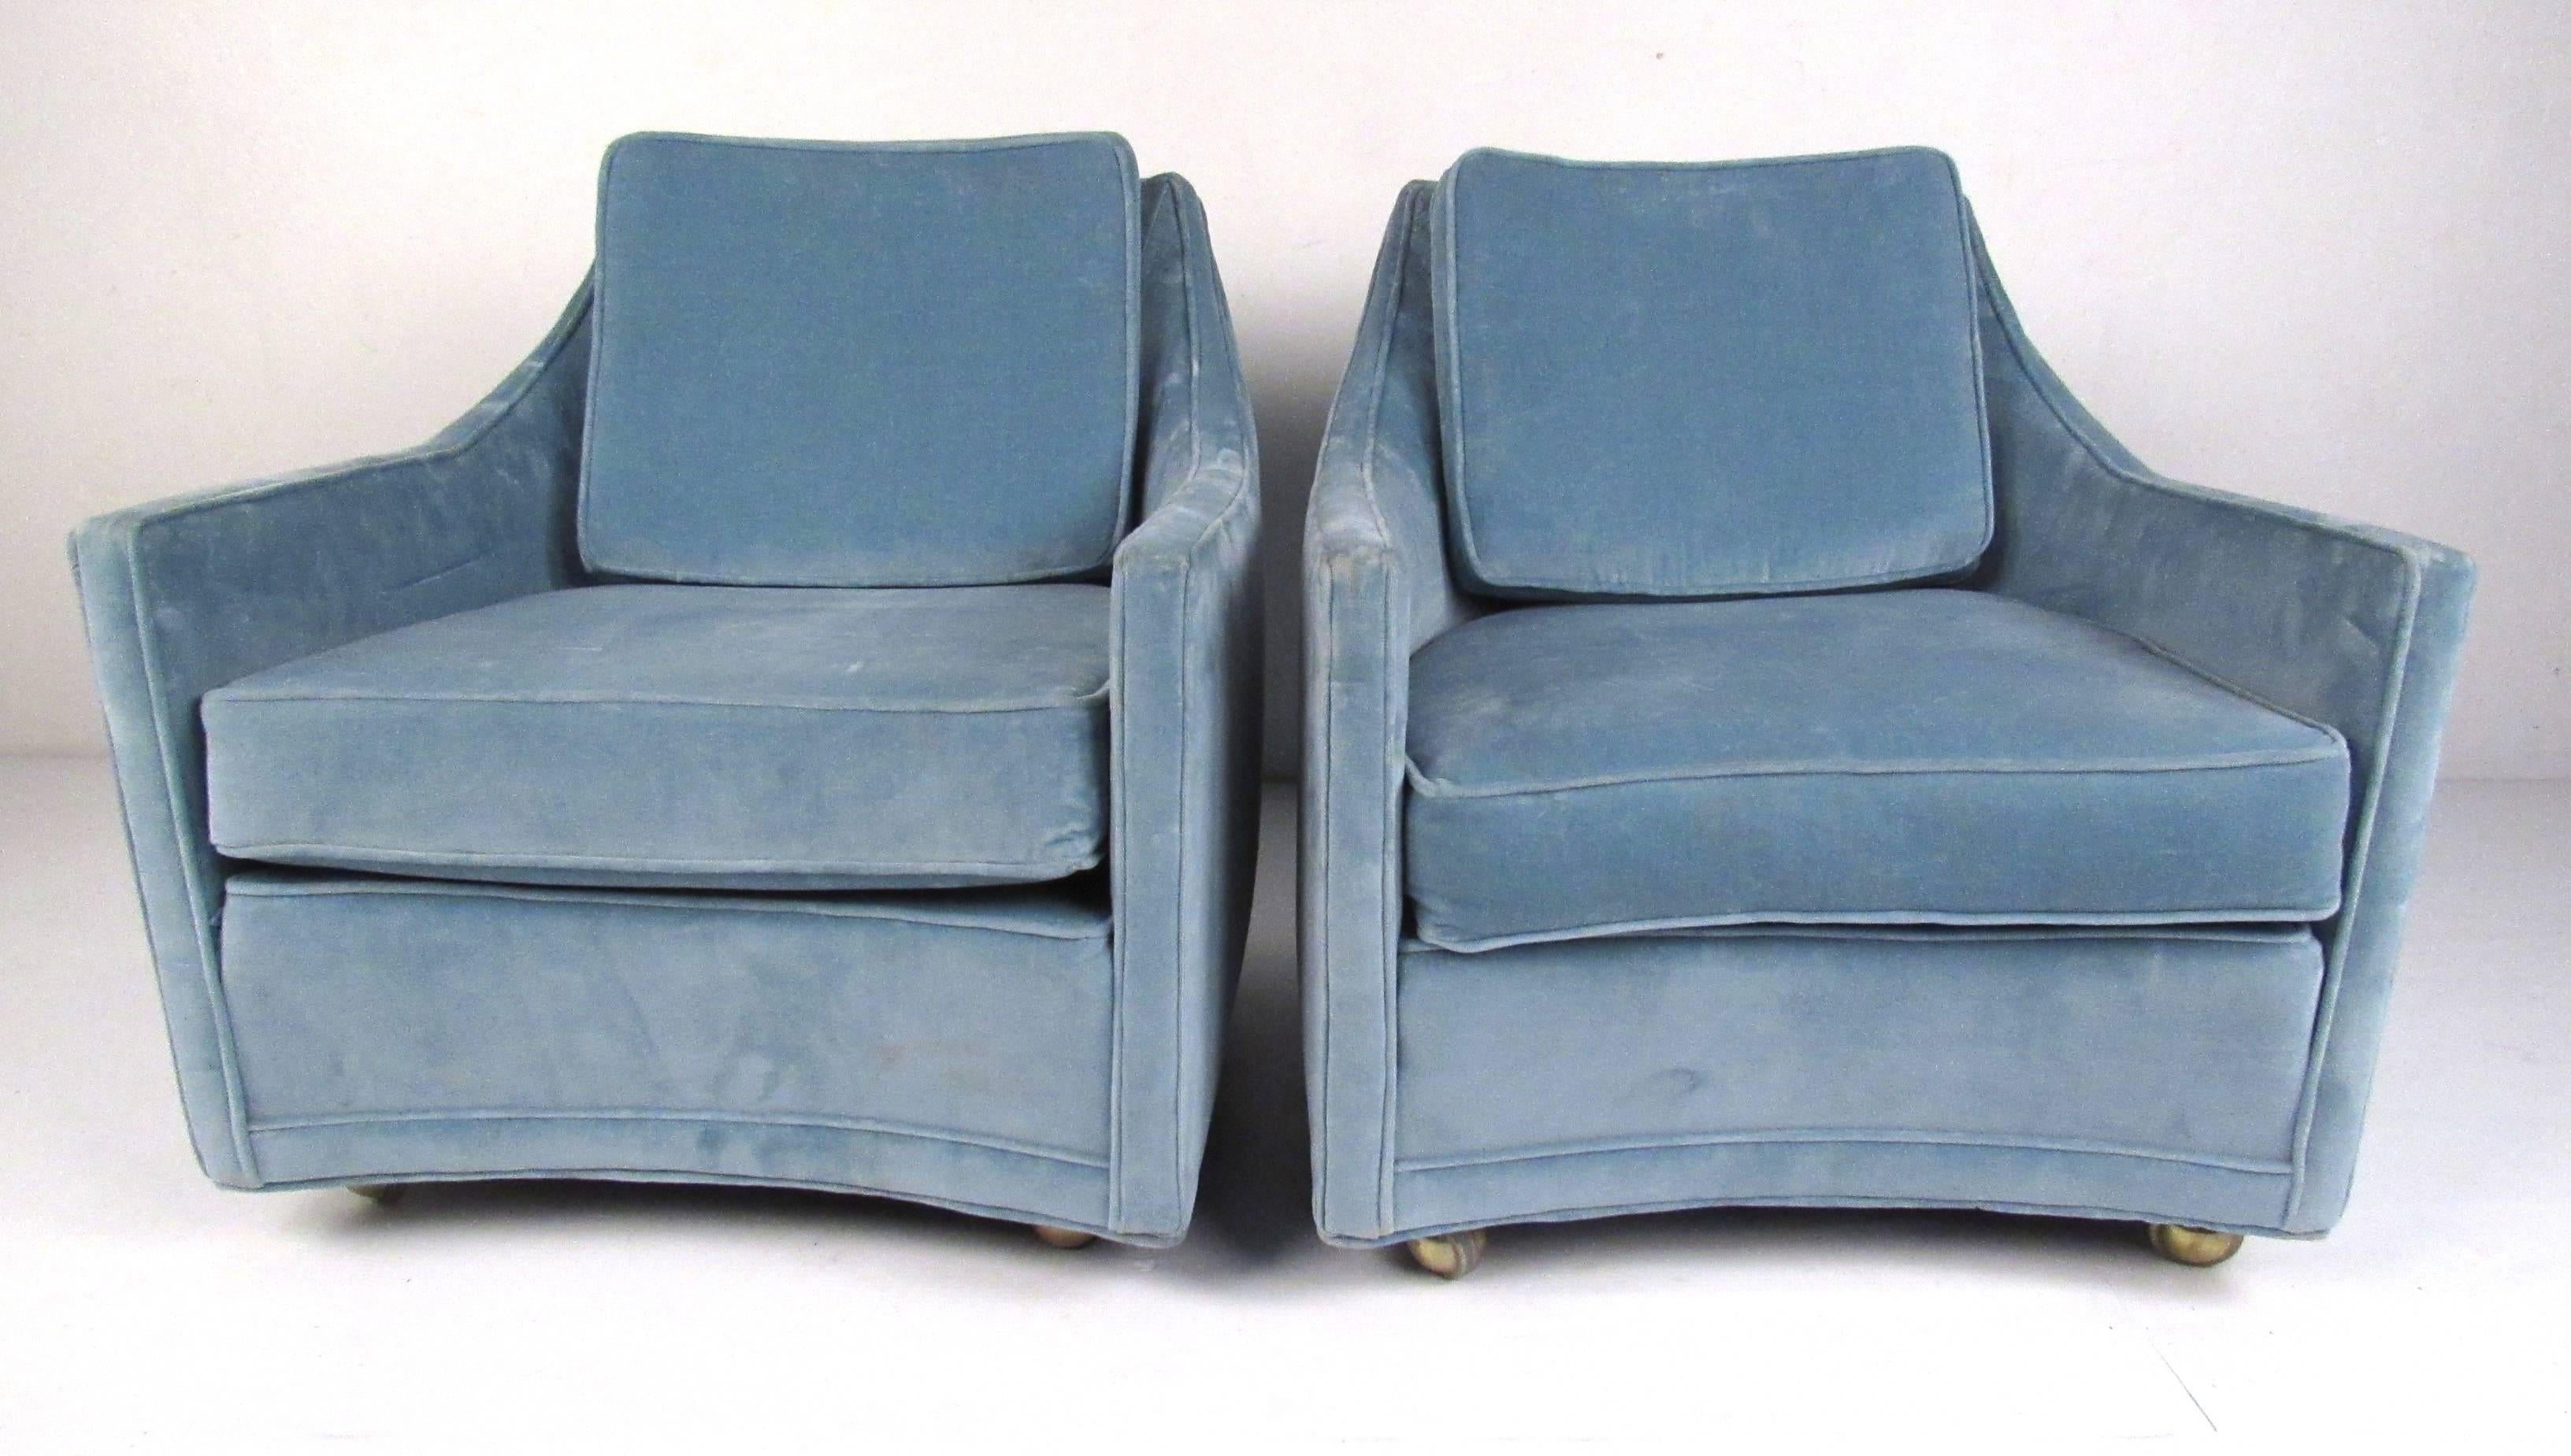 Pair of smaller scale vintage American club chairs with gently sloping arms, comfortable back cushions and casters. Please confirm item location (NY or NJ) with dealer.